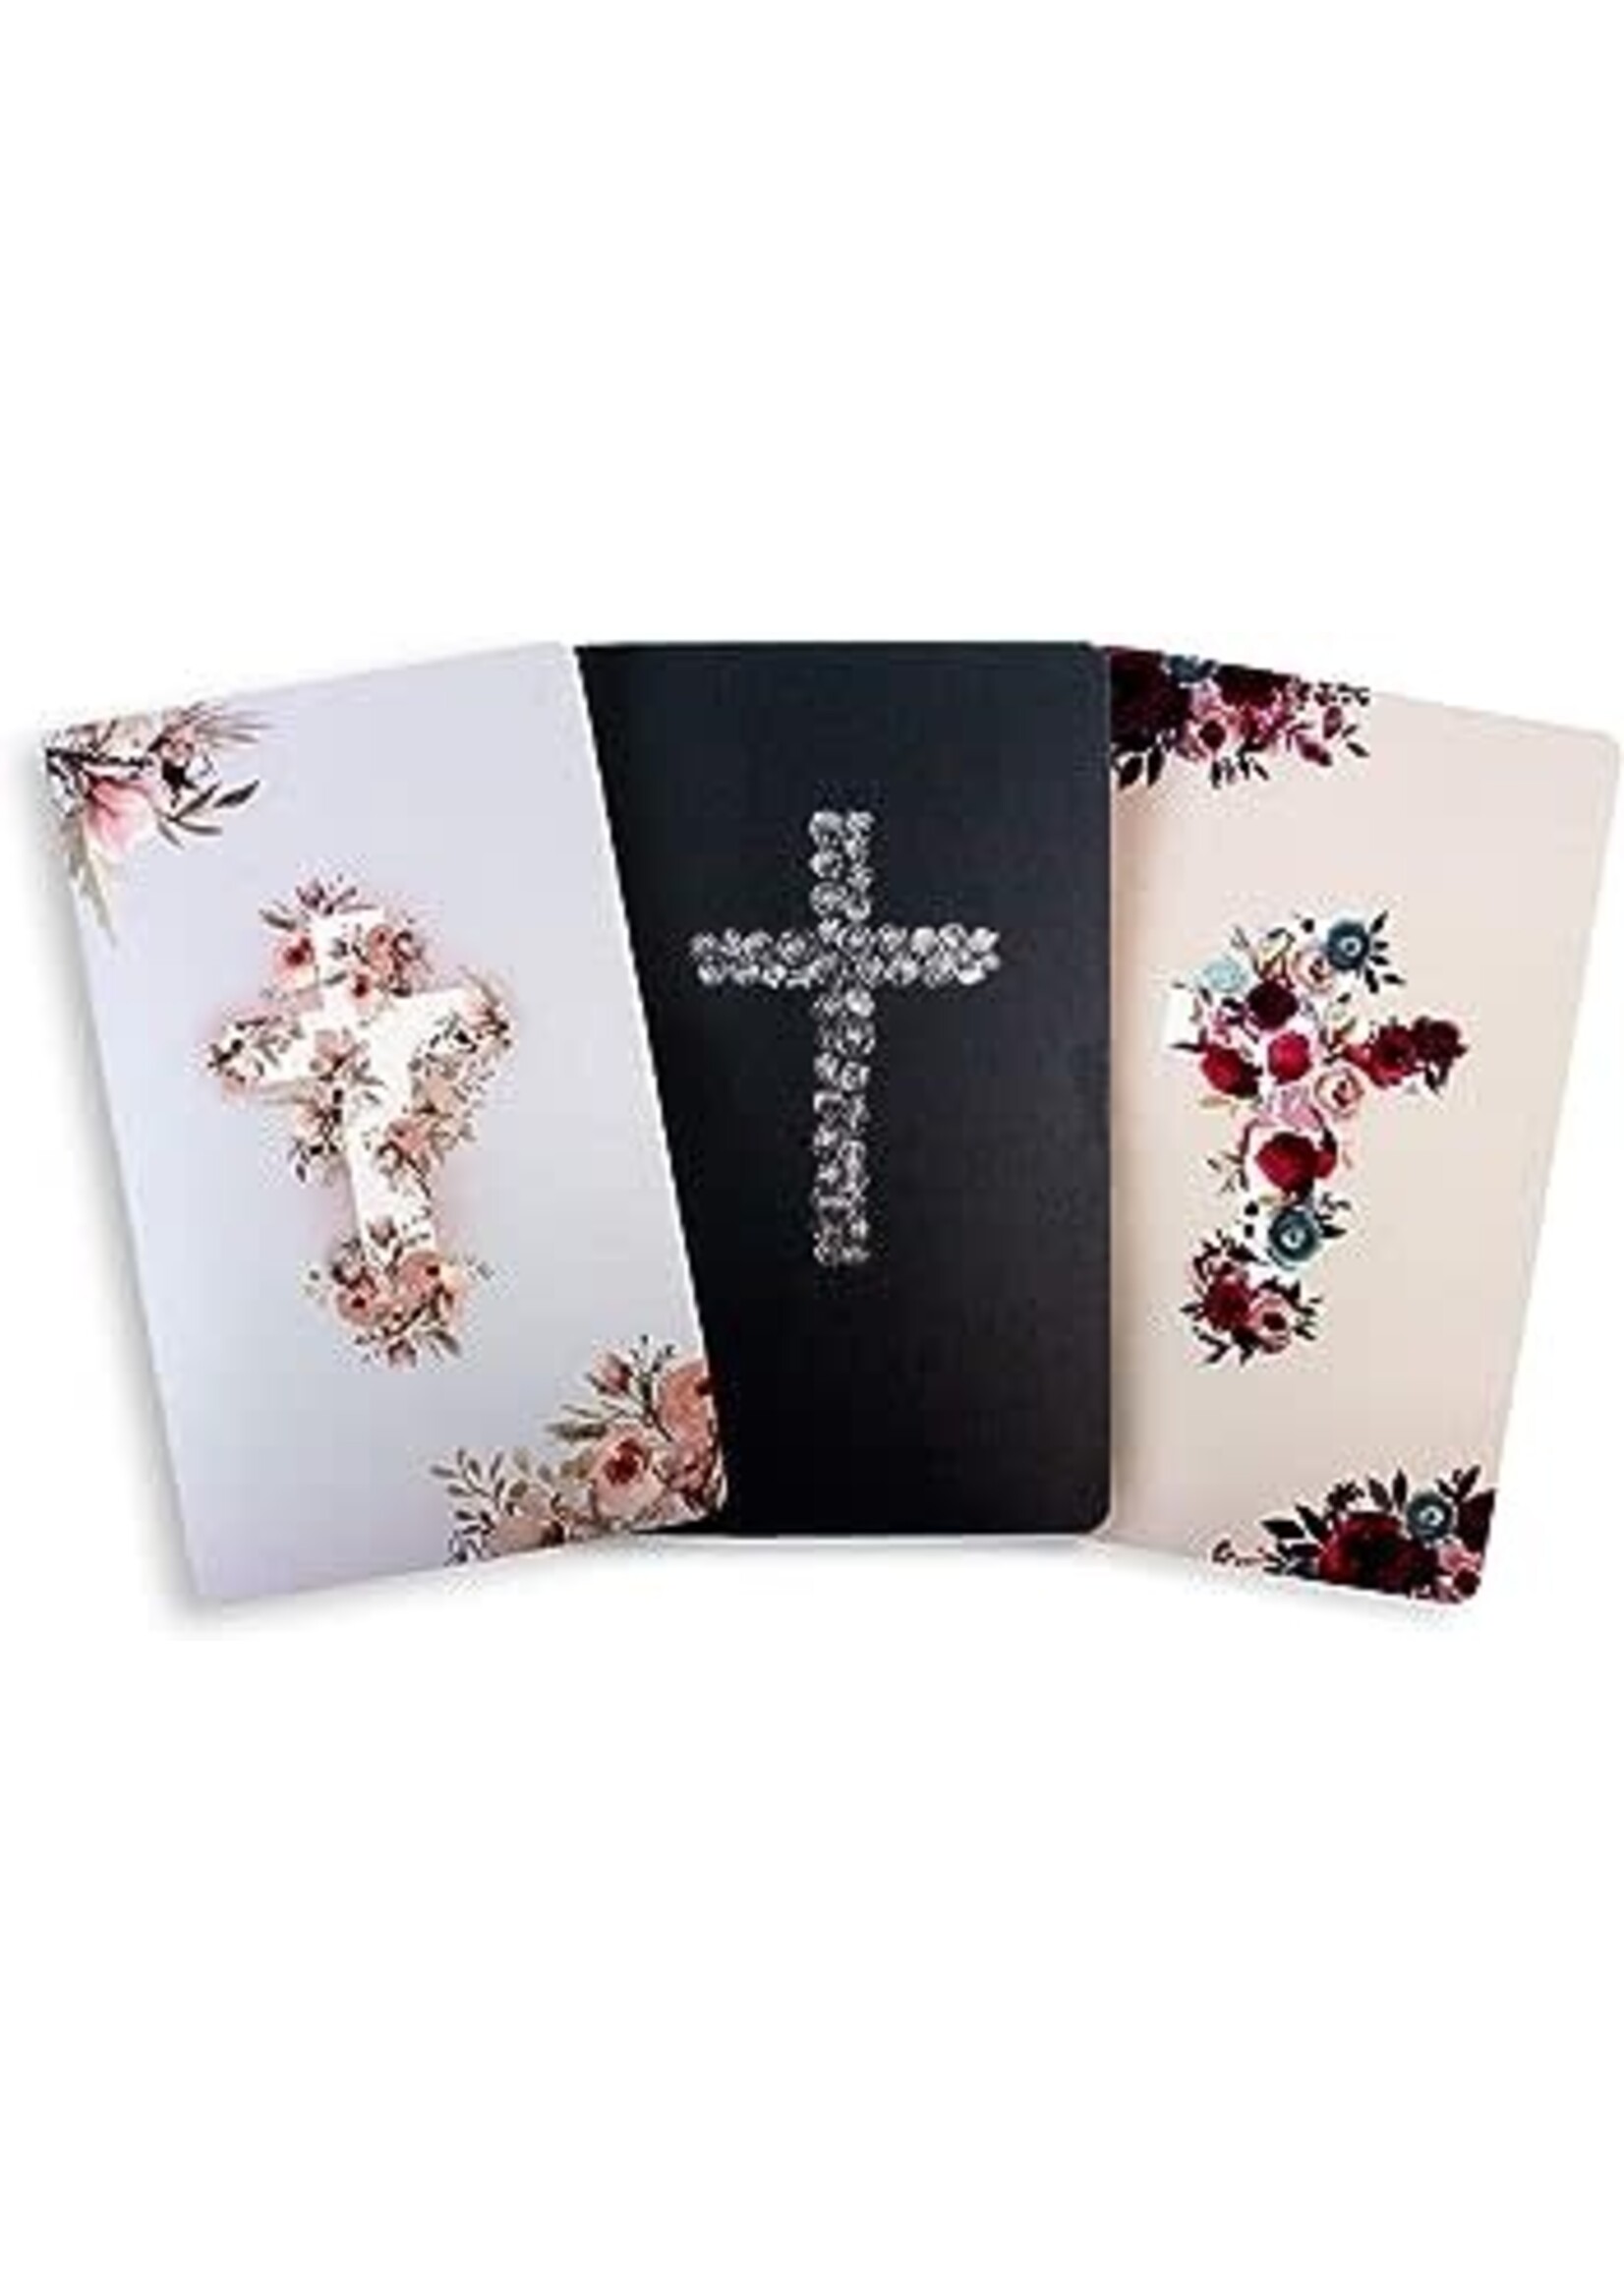 Foral Cross Cahier Journal